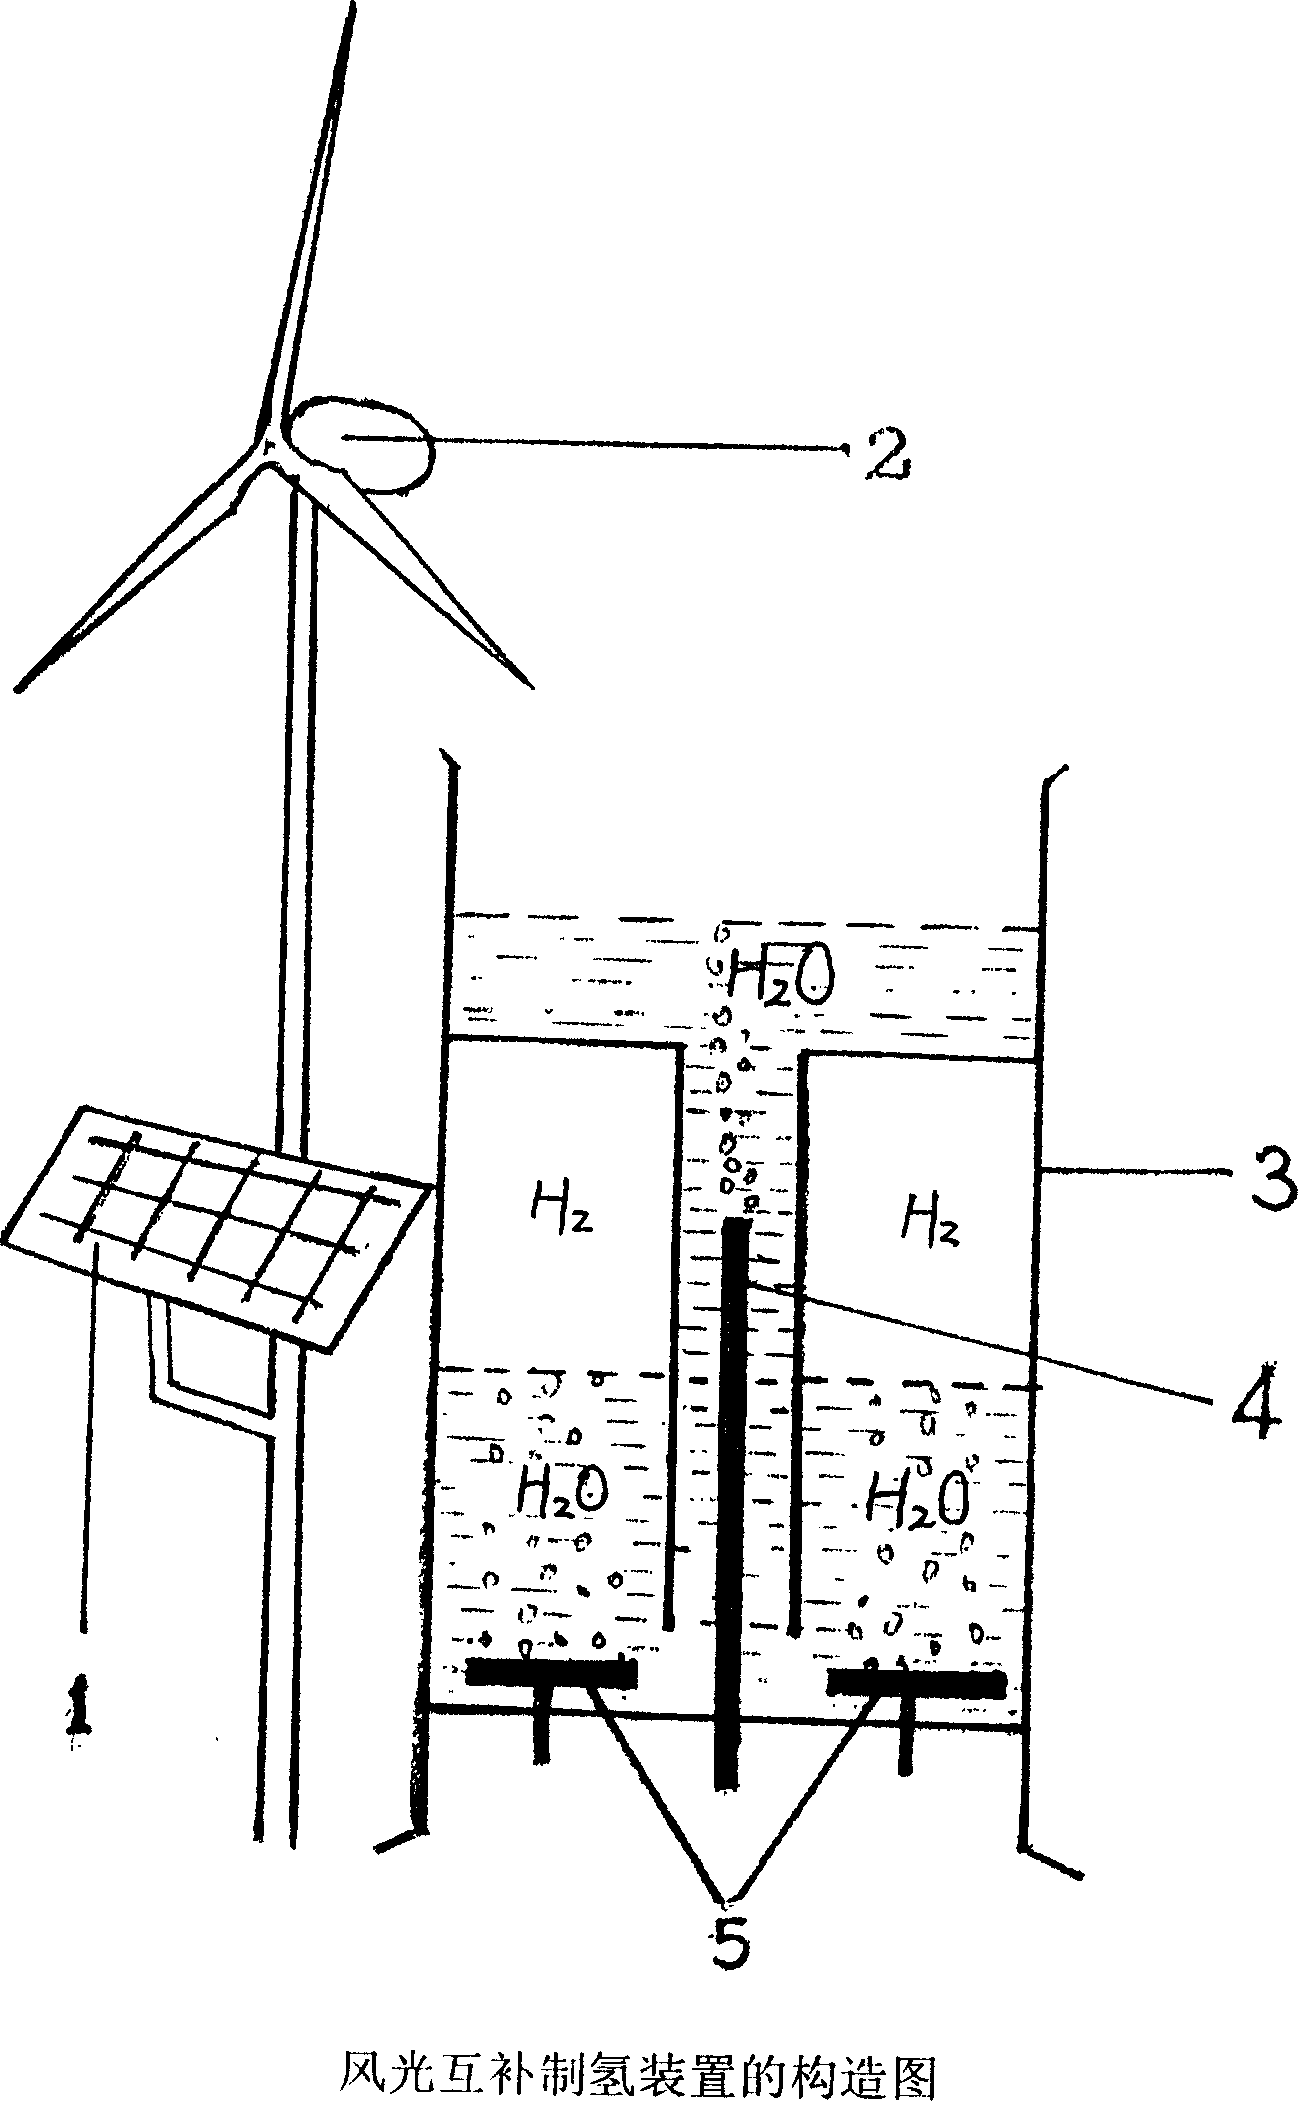 Process for preparing hydrogen by wind-PV hybrid method and its device